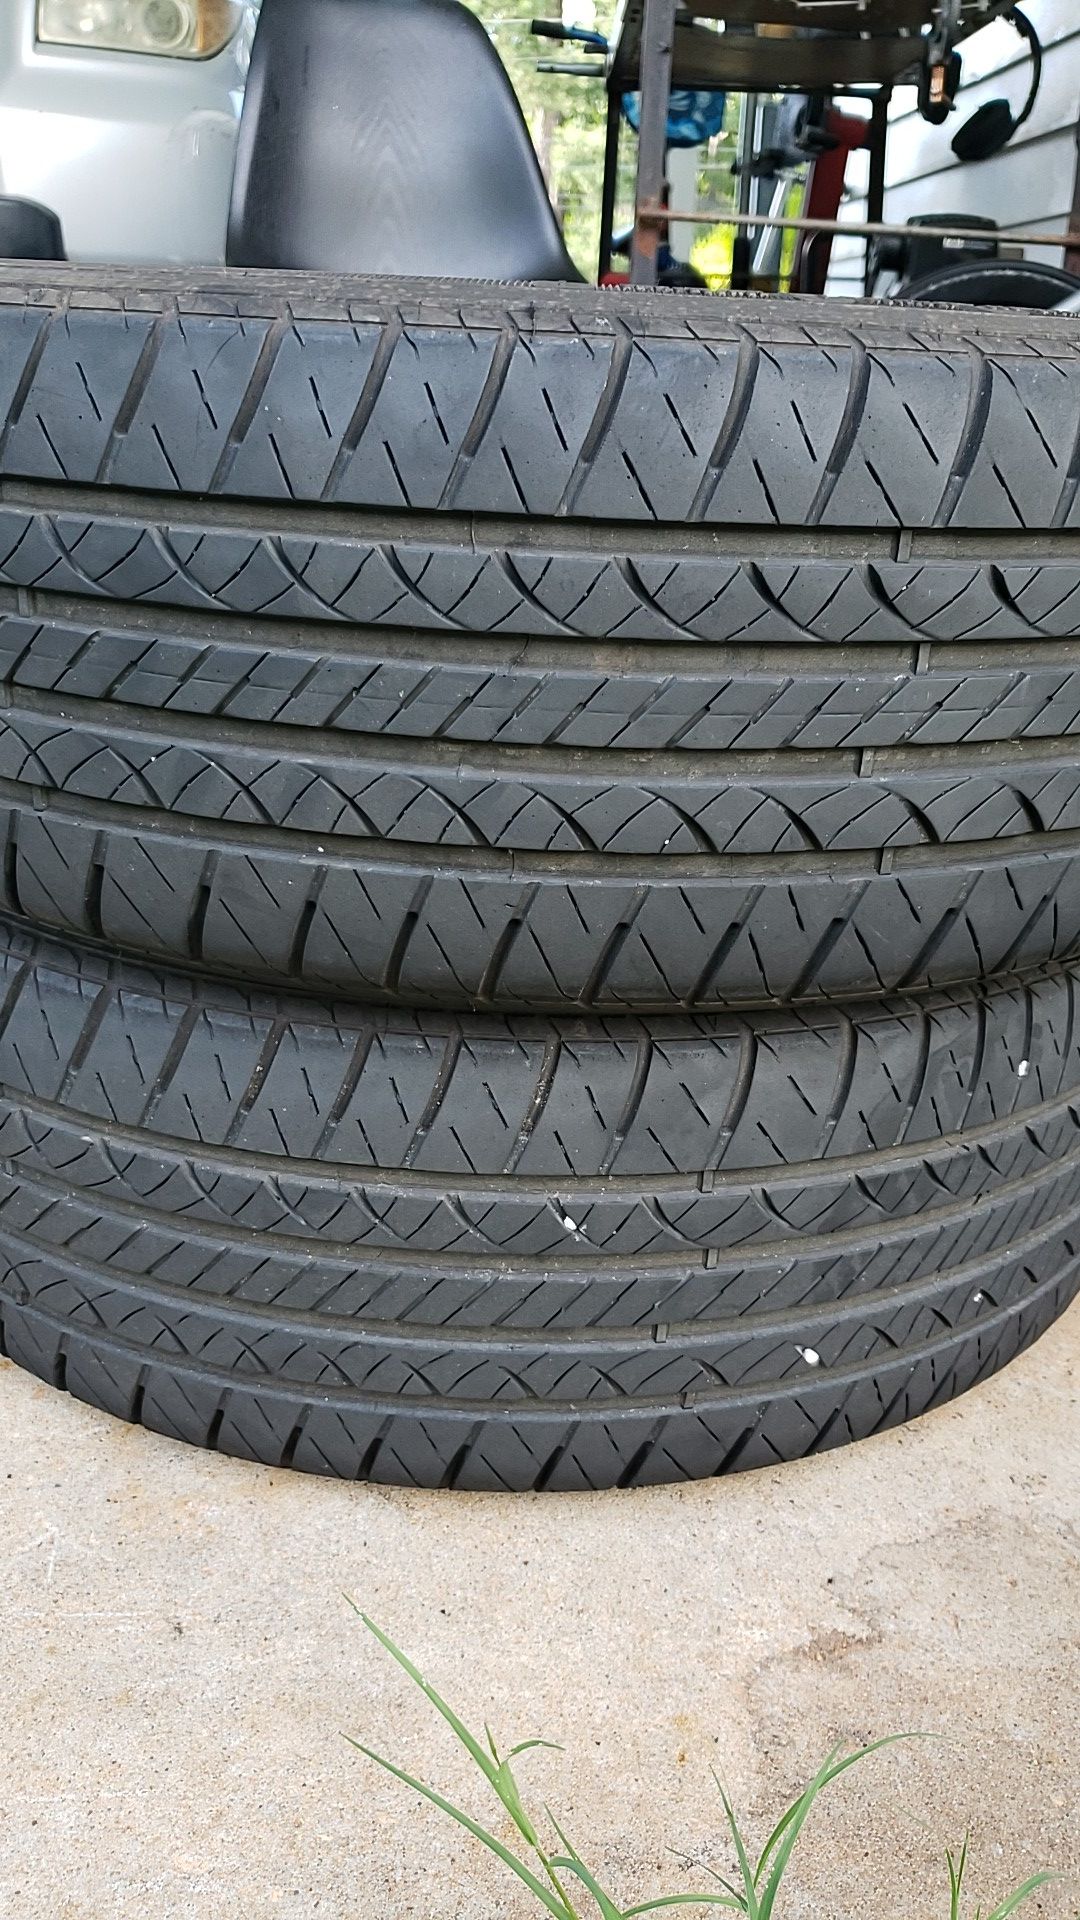 *215/60/16* Tires for sale